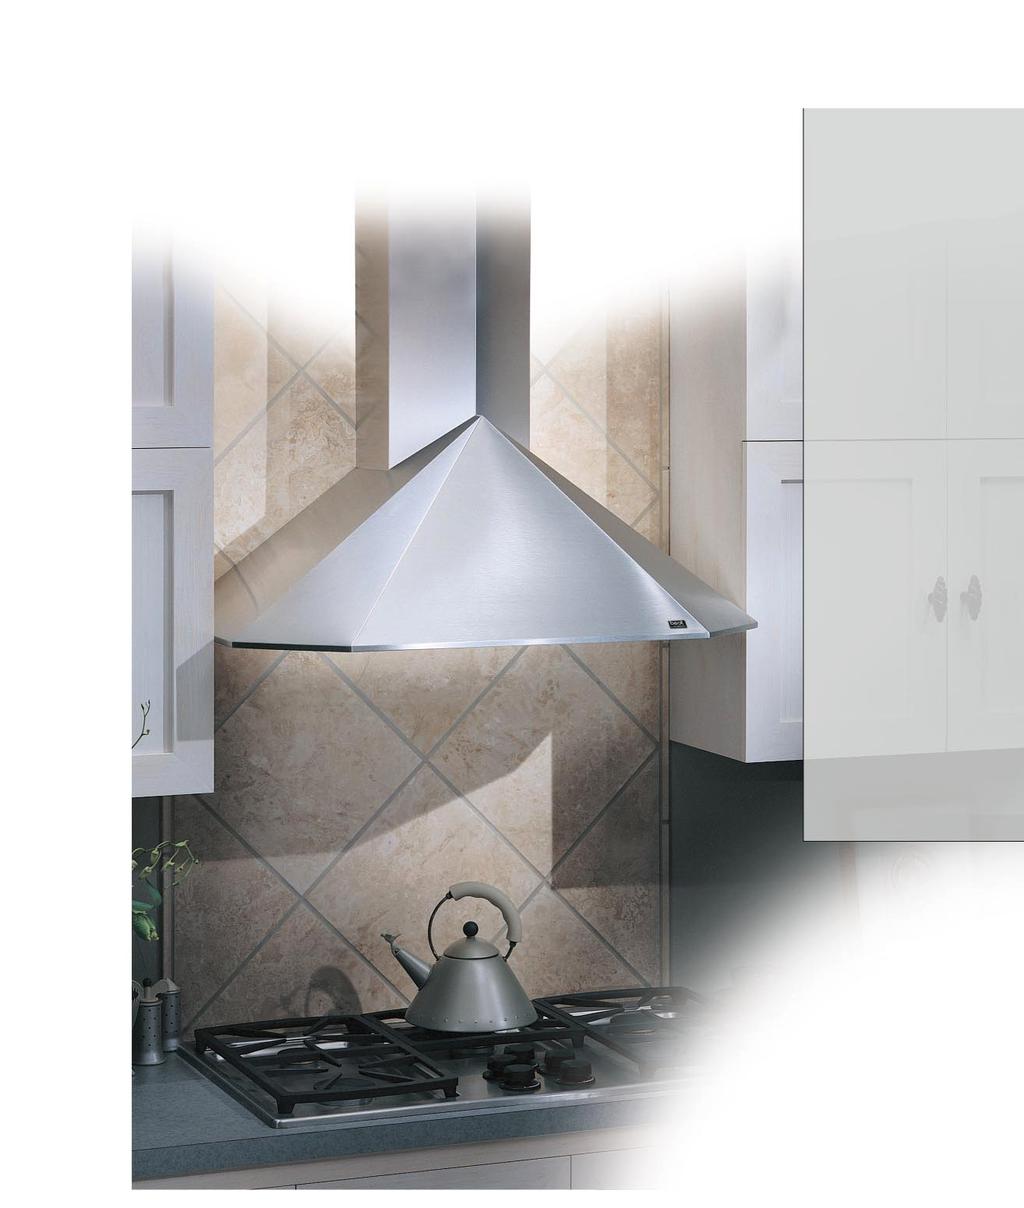 CHIMNEY HOODS When you design a kitchen for the unique individuals who use it, complement it with something surprising and of singular beauty.